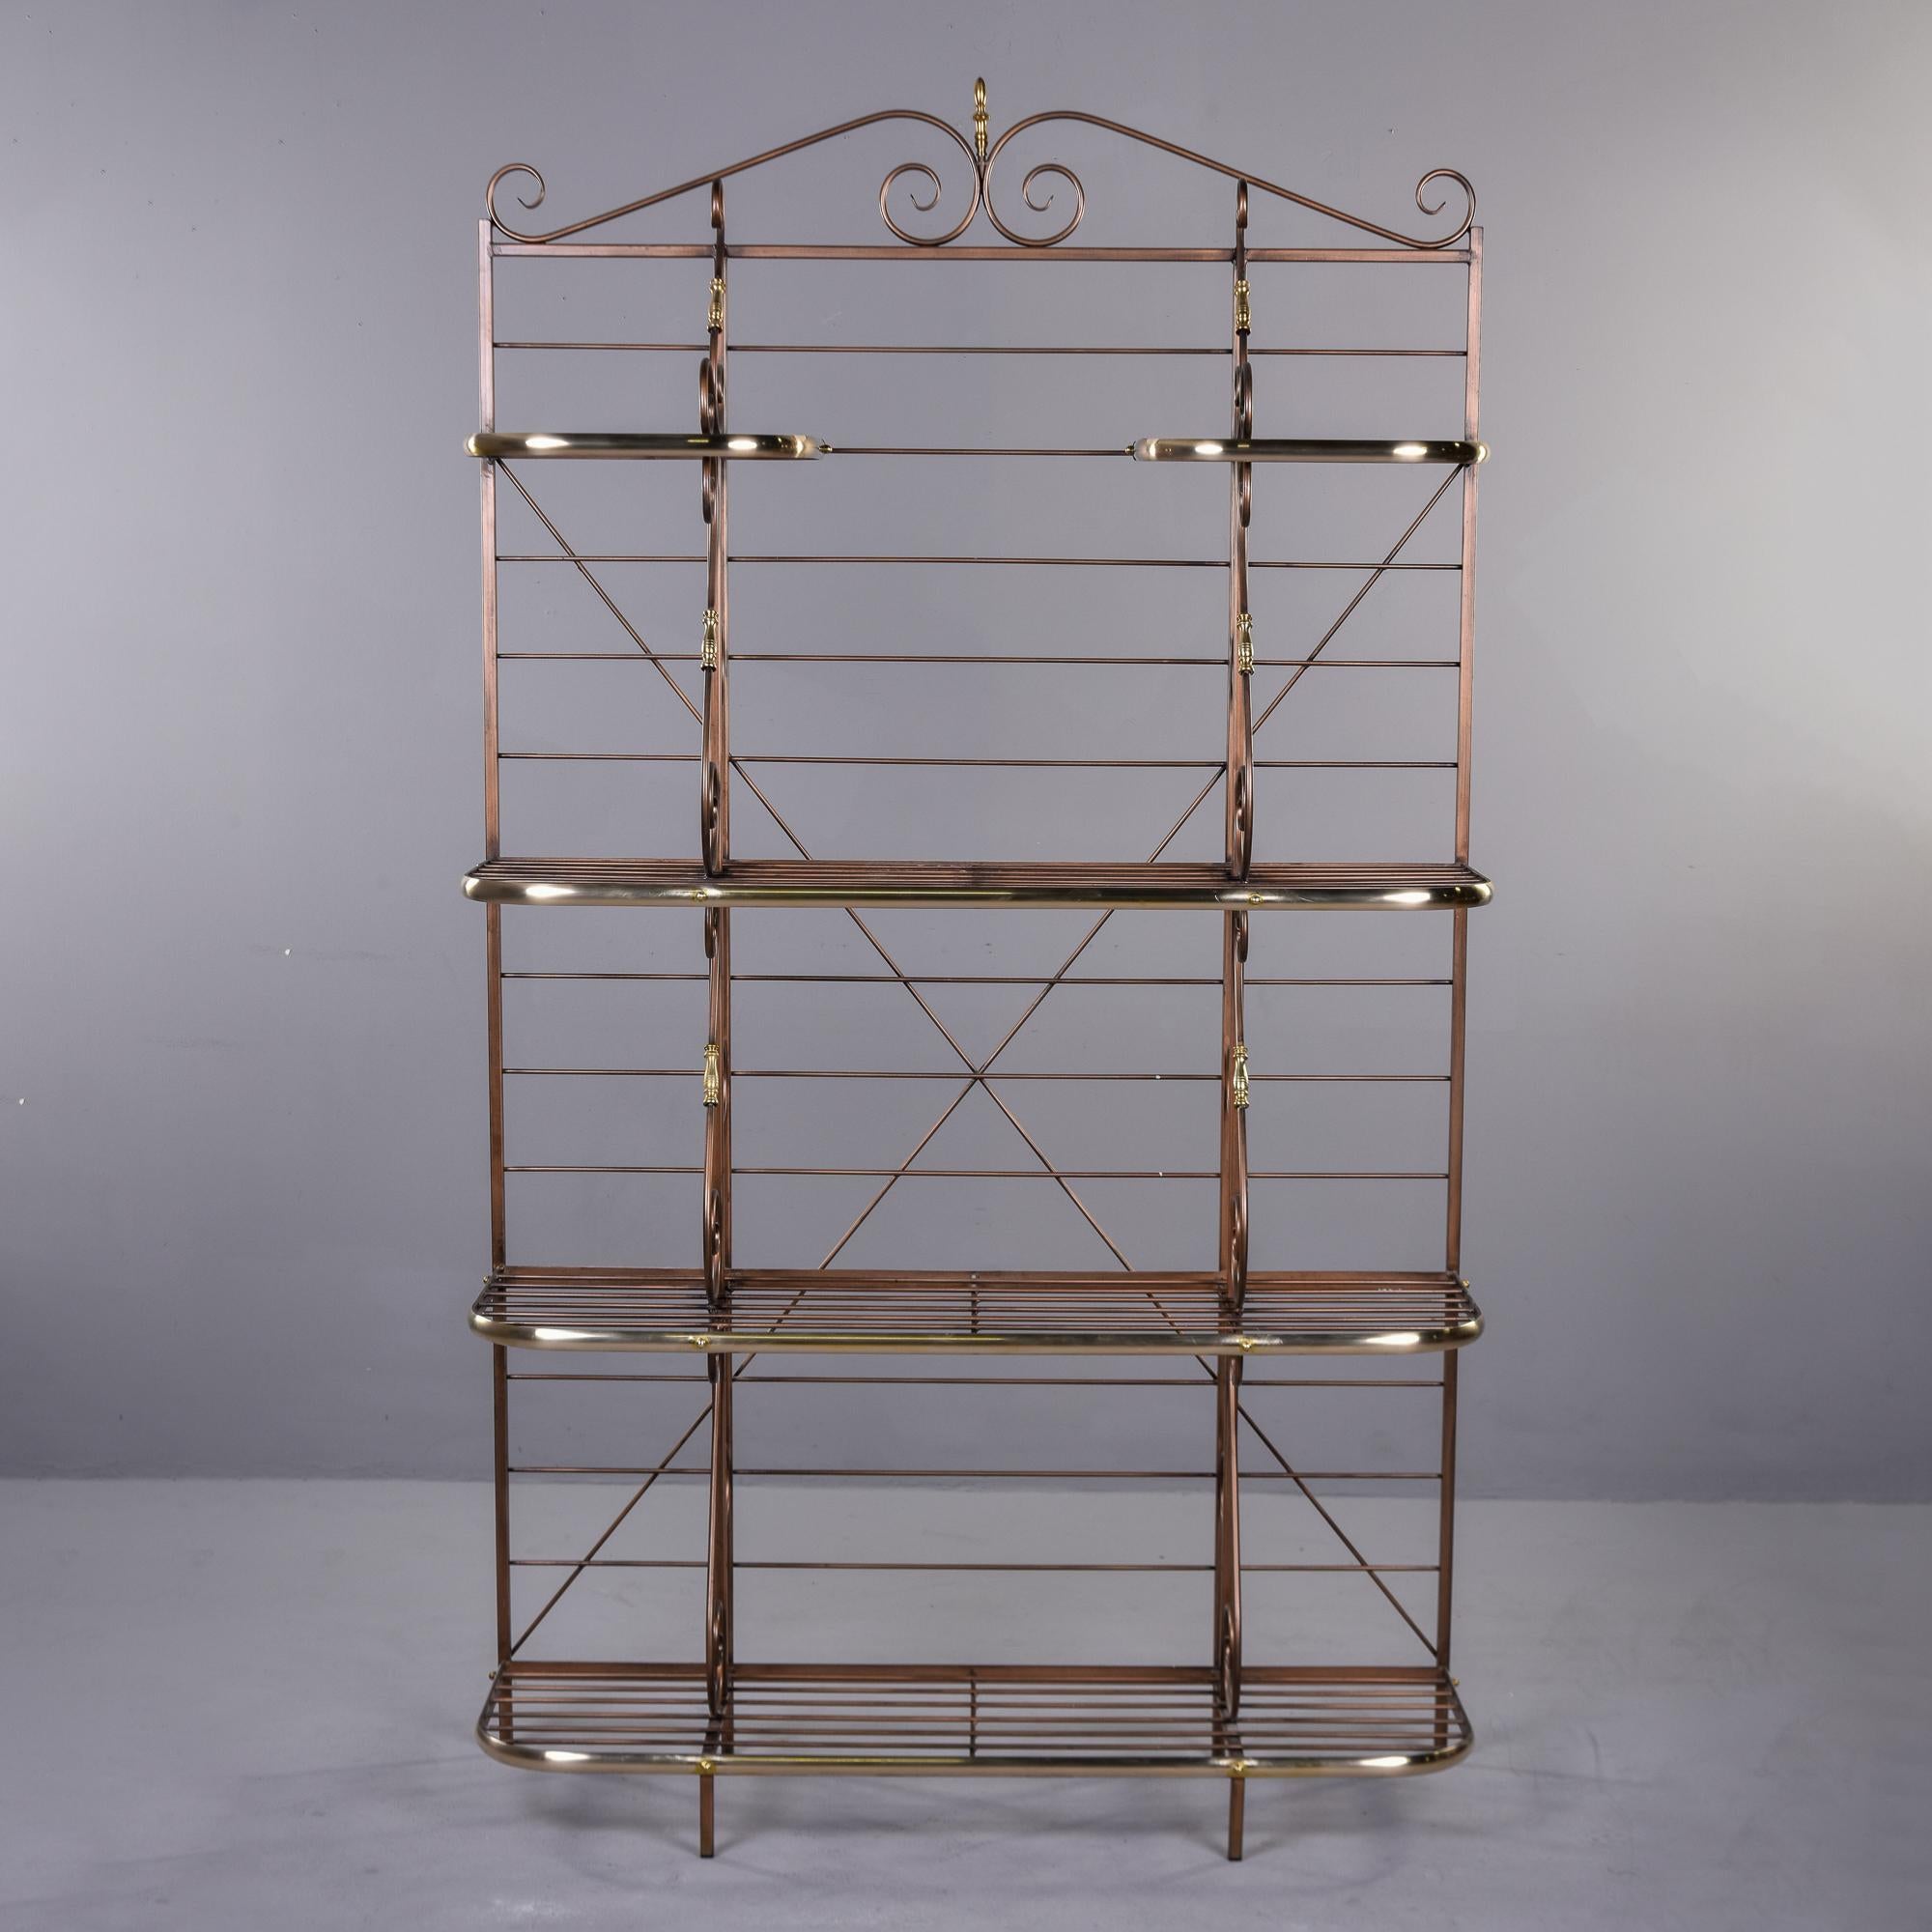 Circa 1980s baker’s rack found in the US has a bronze-colored metal frame with brass bumpers and accents. Five shelves in total: two small ones at the top with three full-width shelves below. Top has a scrolled metal crest. Unknown maker. Very good